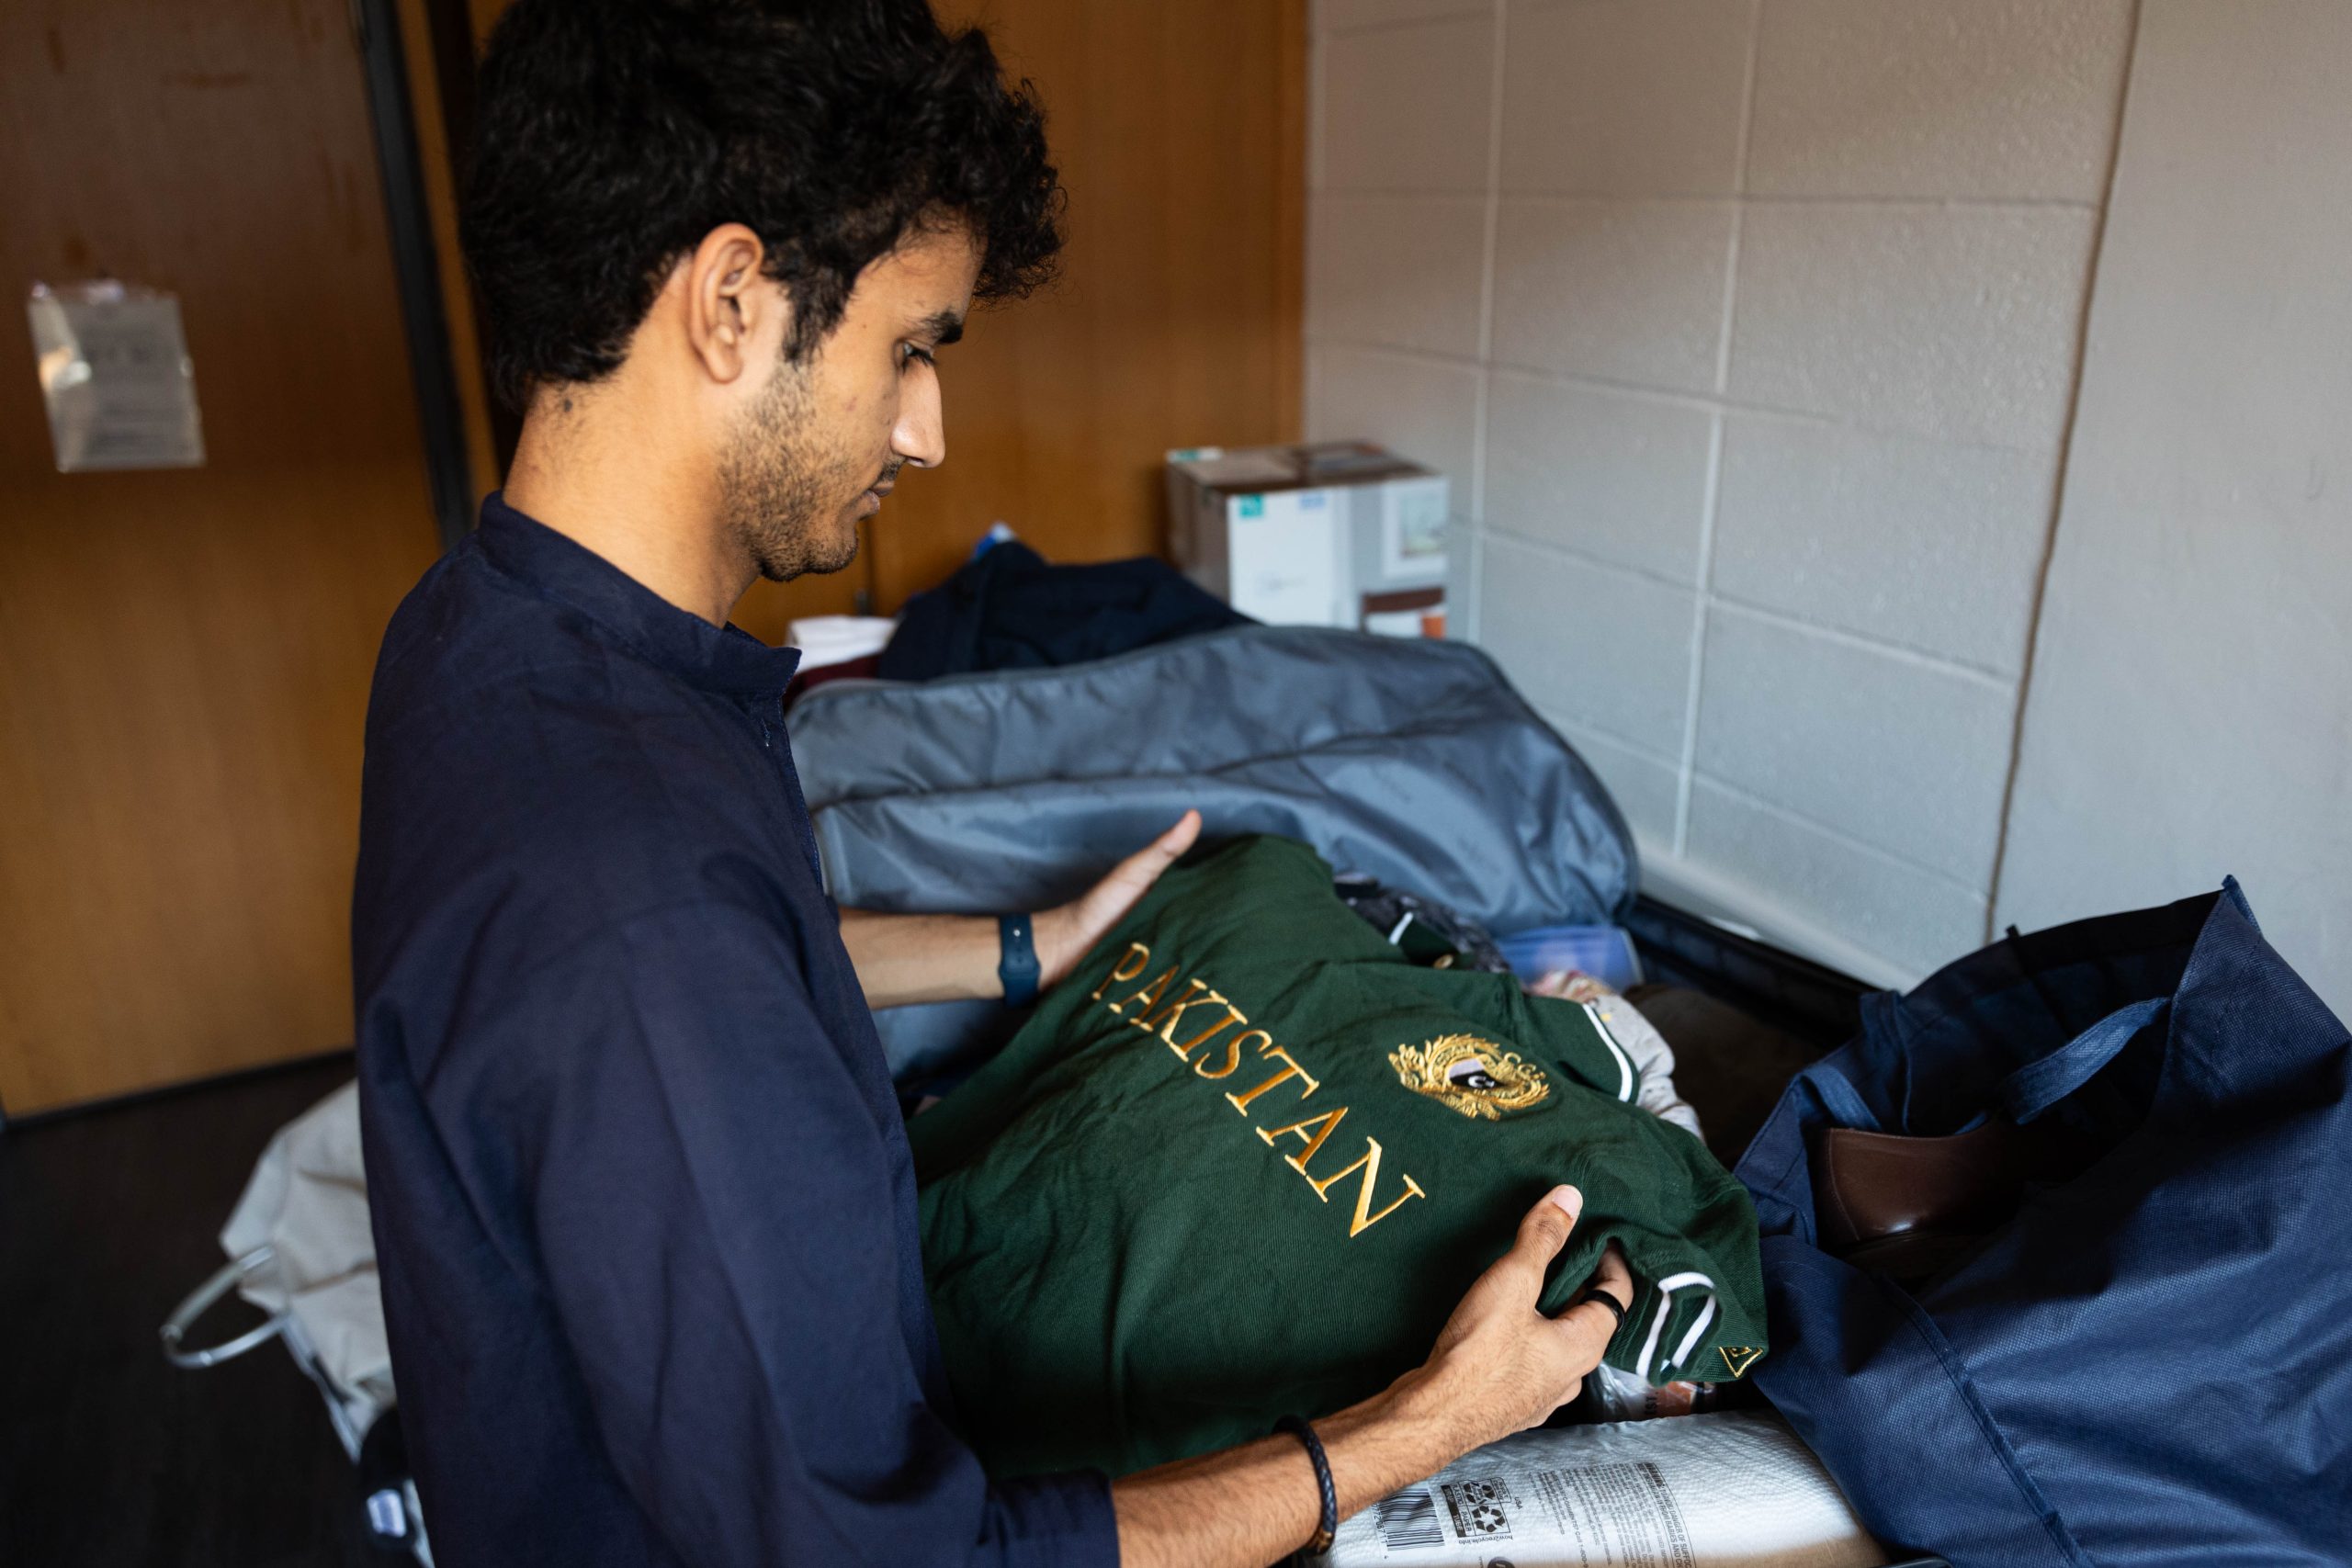 A male college student unpacks a green sweatshirt that says "Pakistan" across the front.